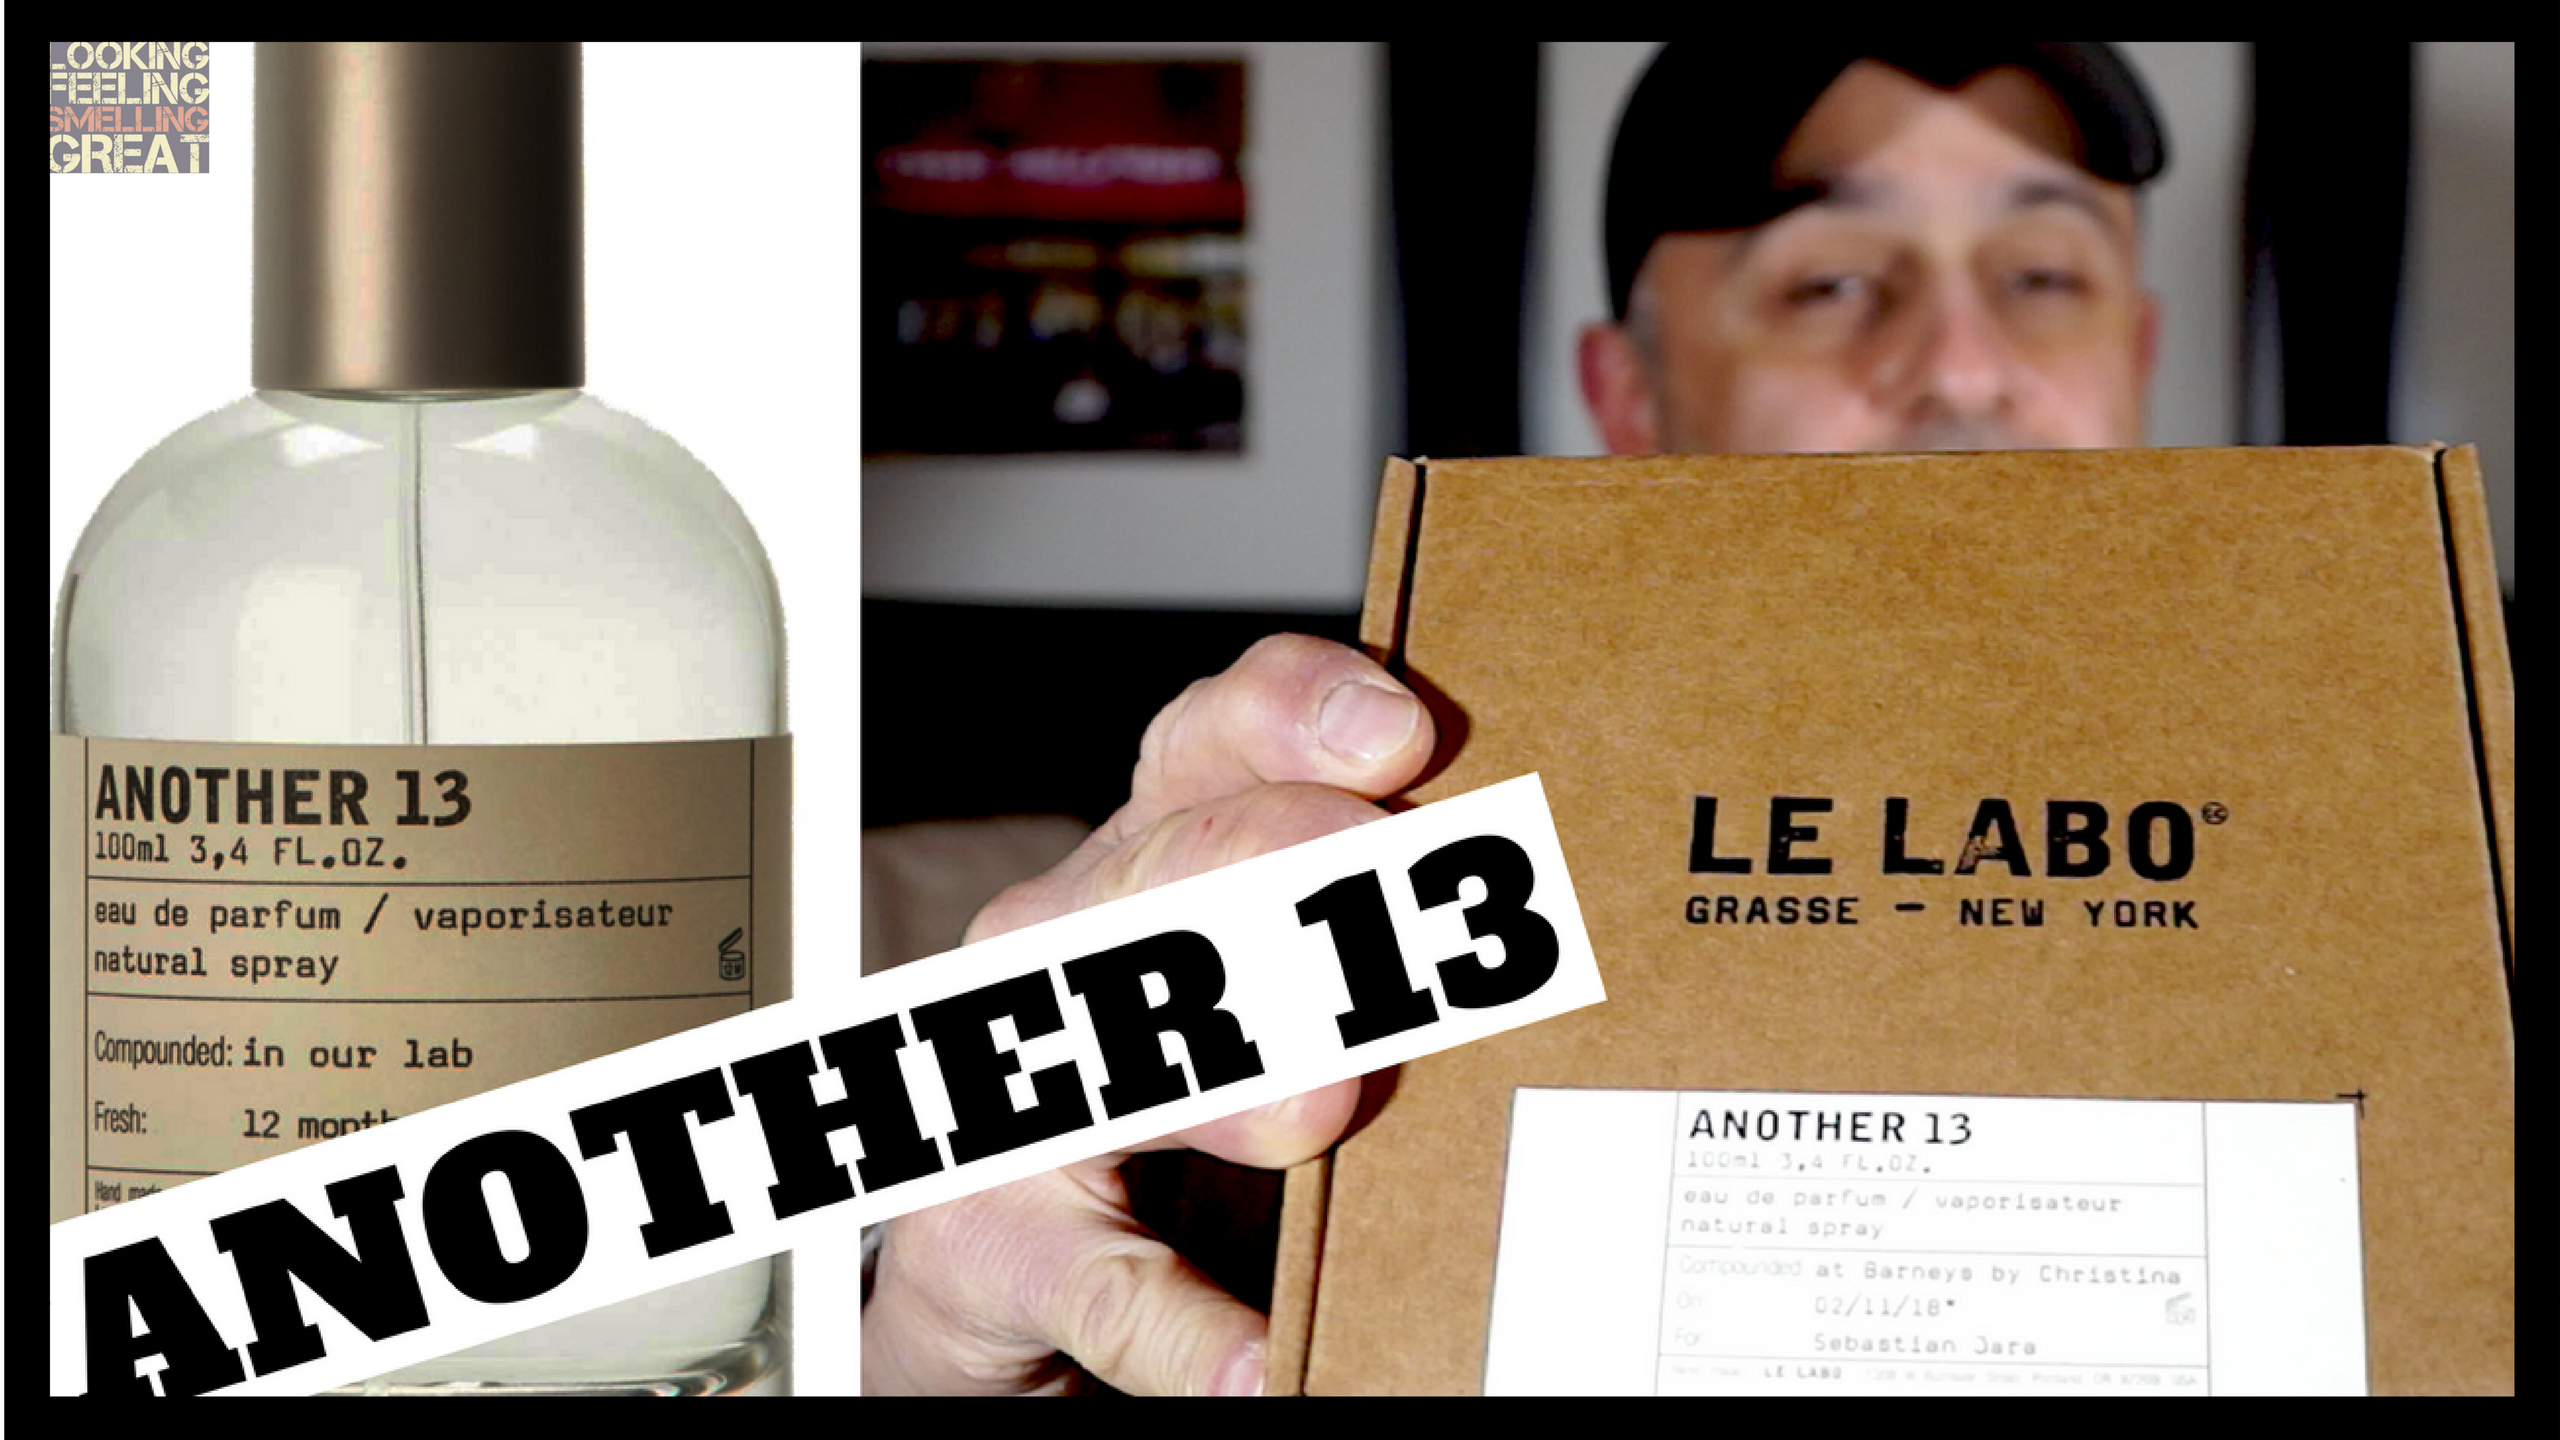 Le Labo Another 13 Review - Looking Feeling Smelling Great